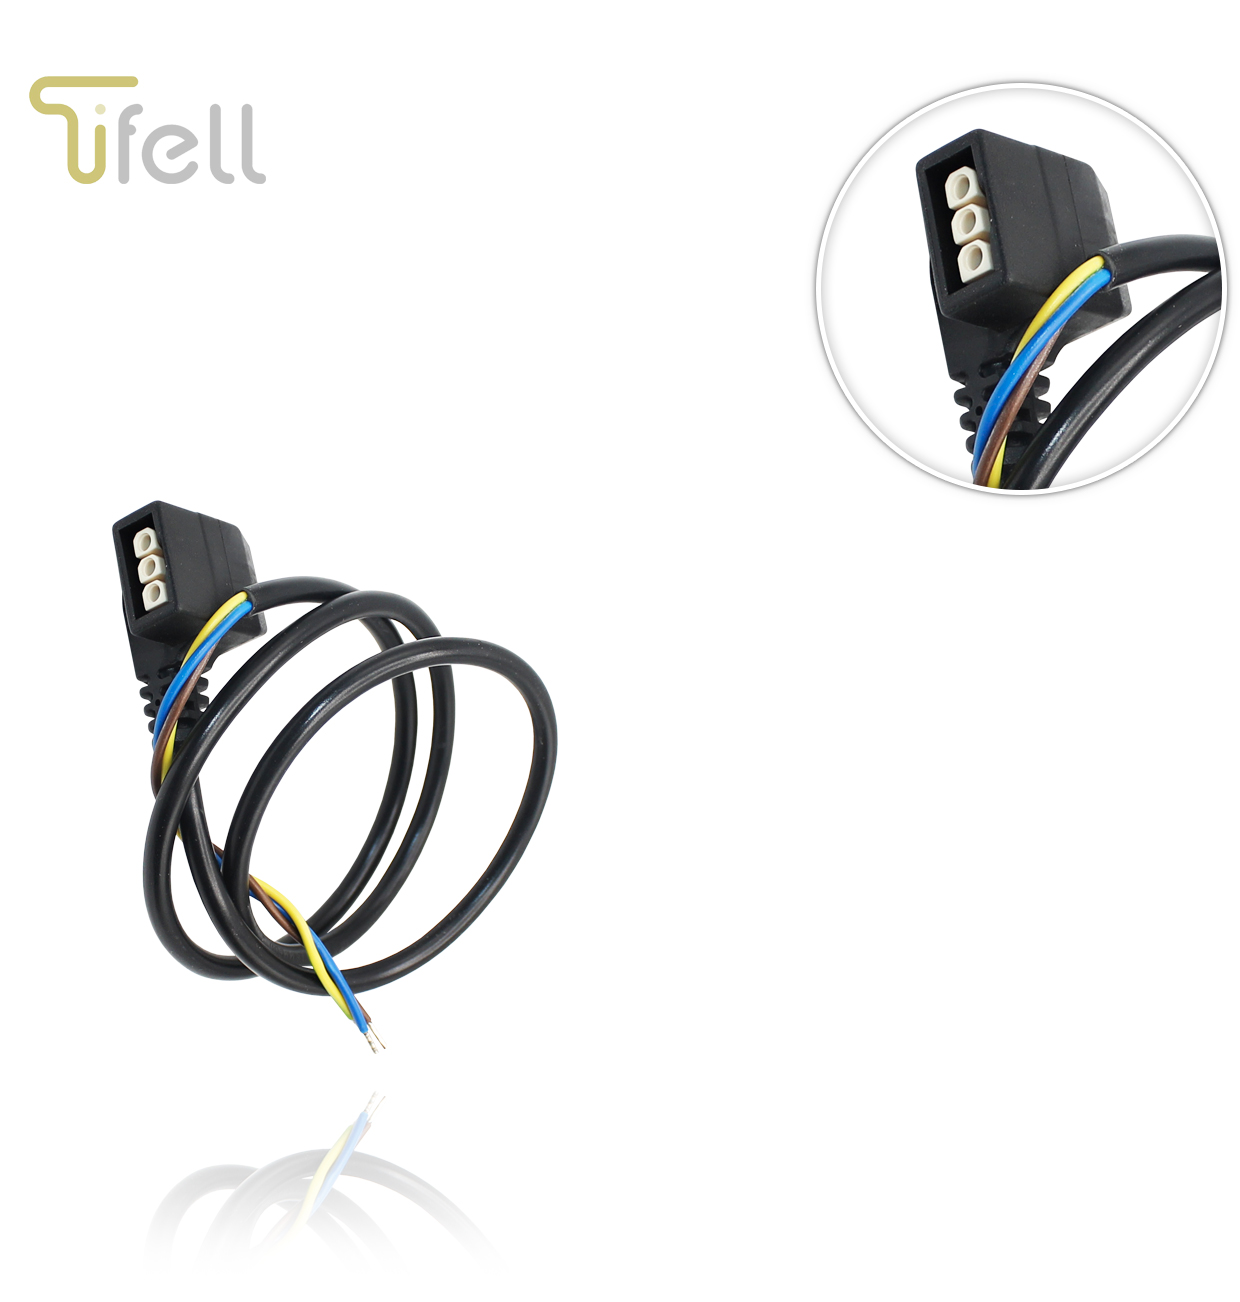 CABLE BOMBA WILO L=800  TIFELL 681122310